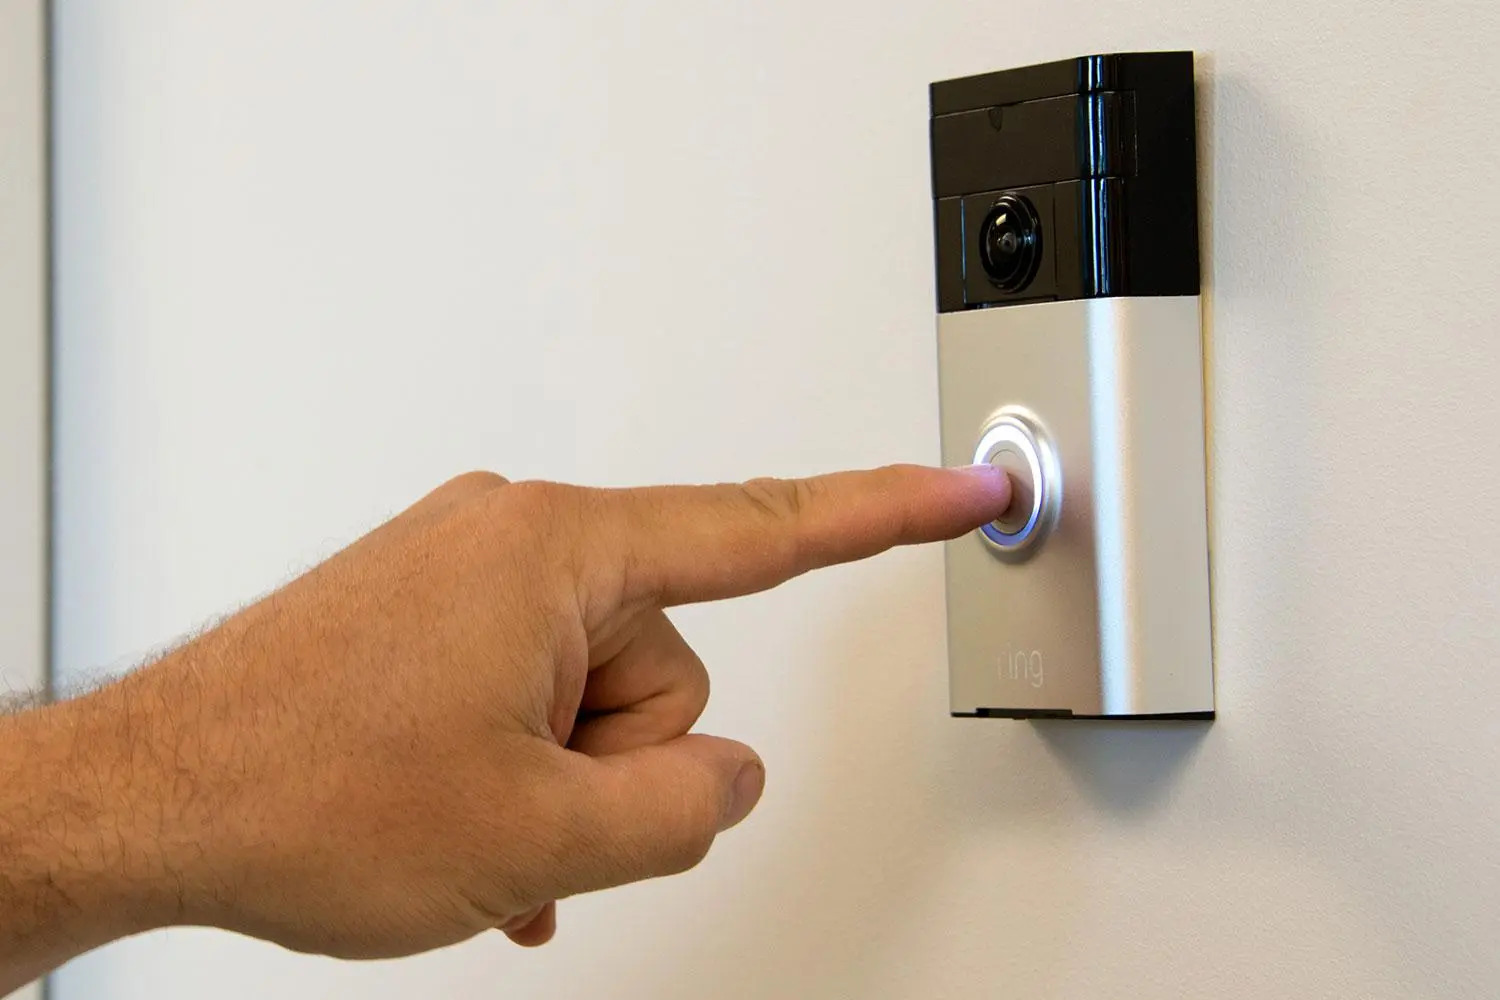 How To Turn Off Ring Video Doorbell